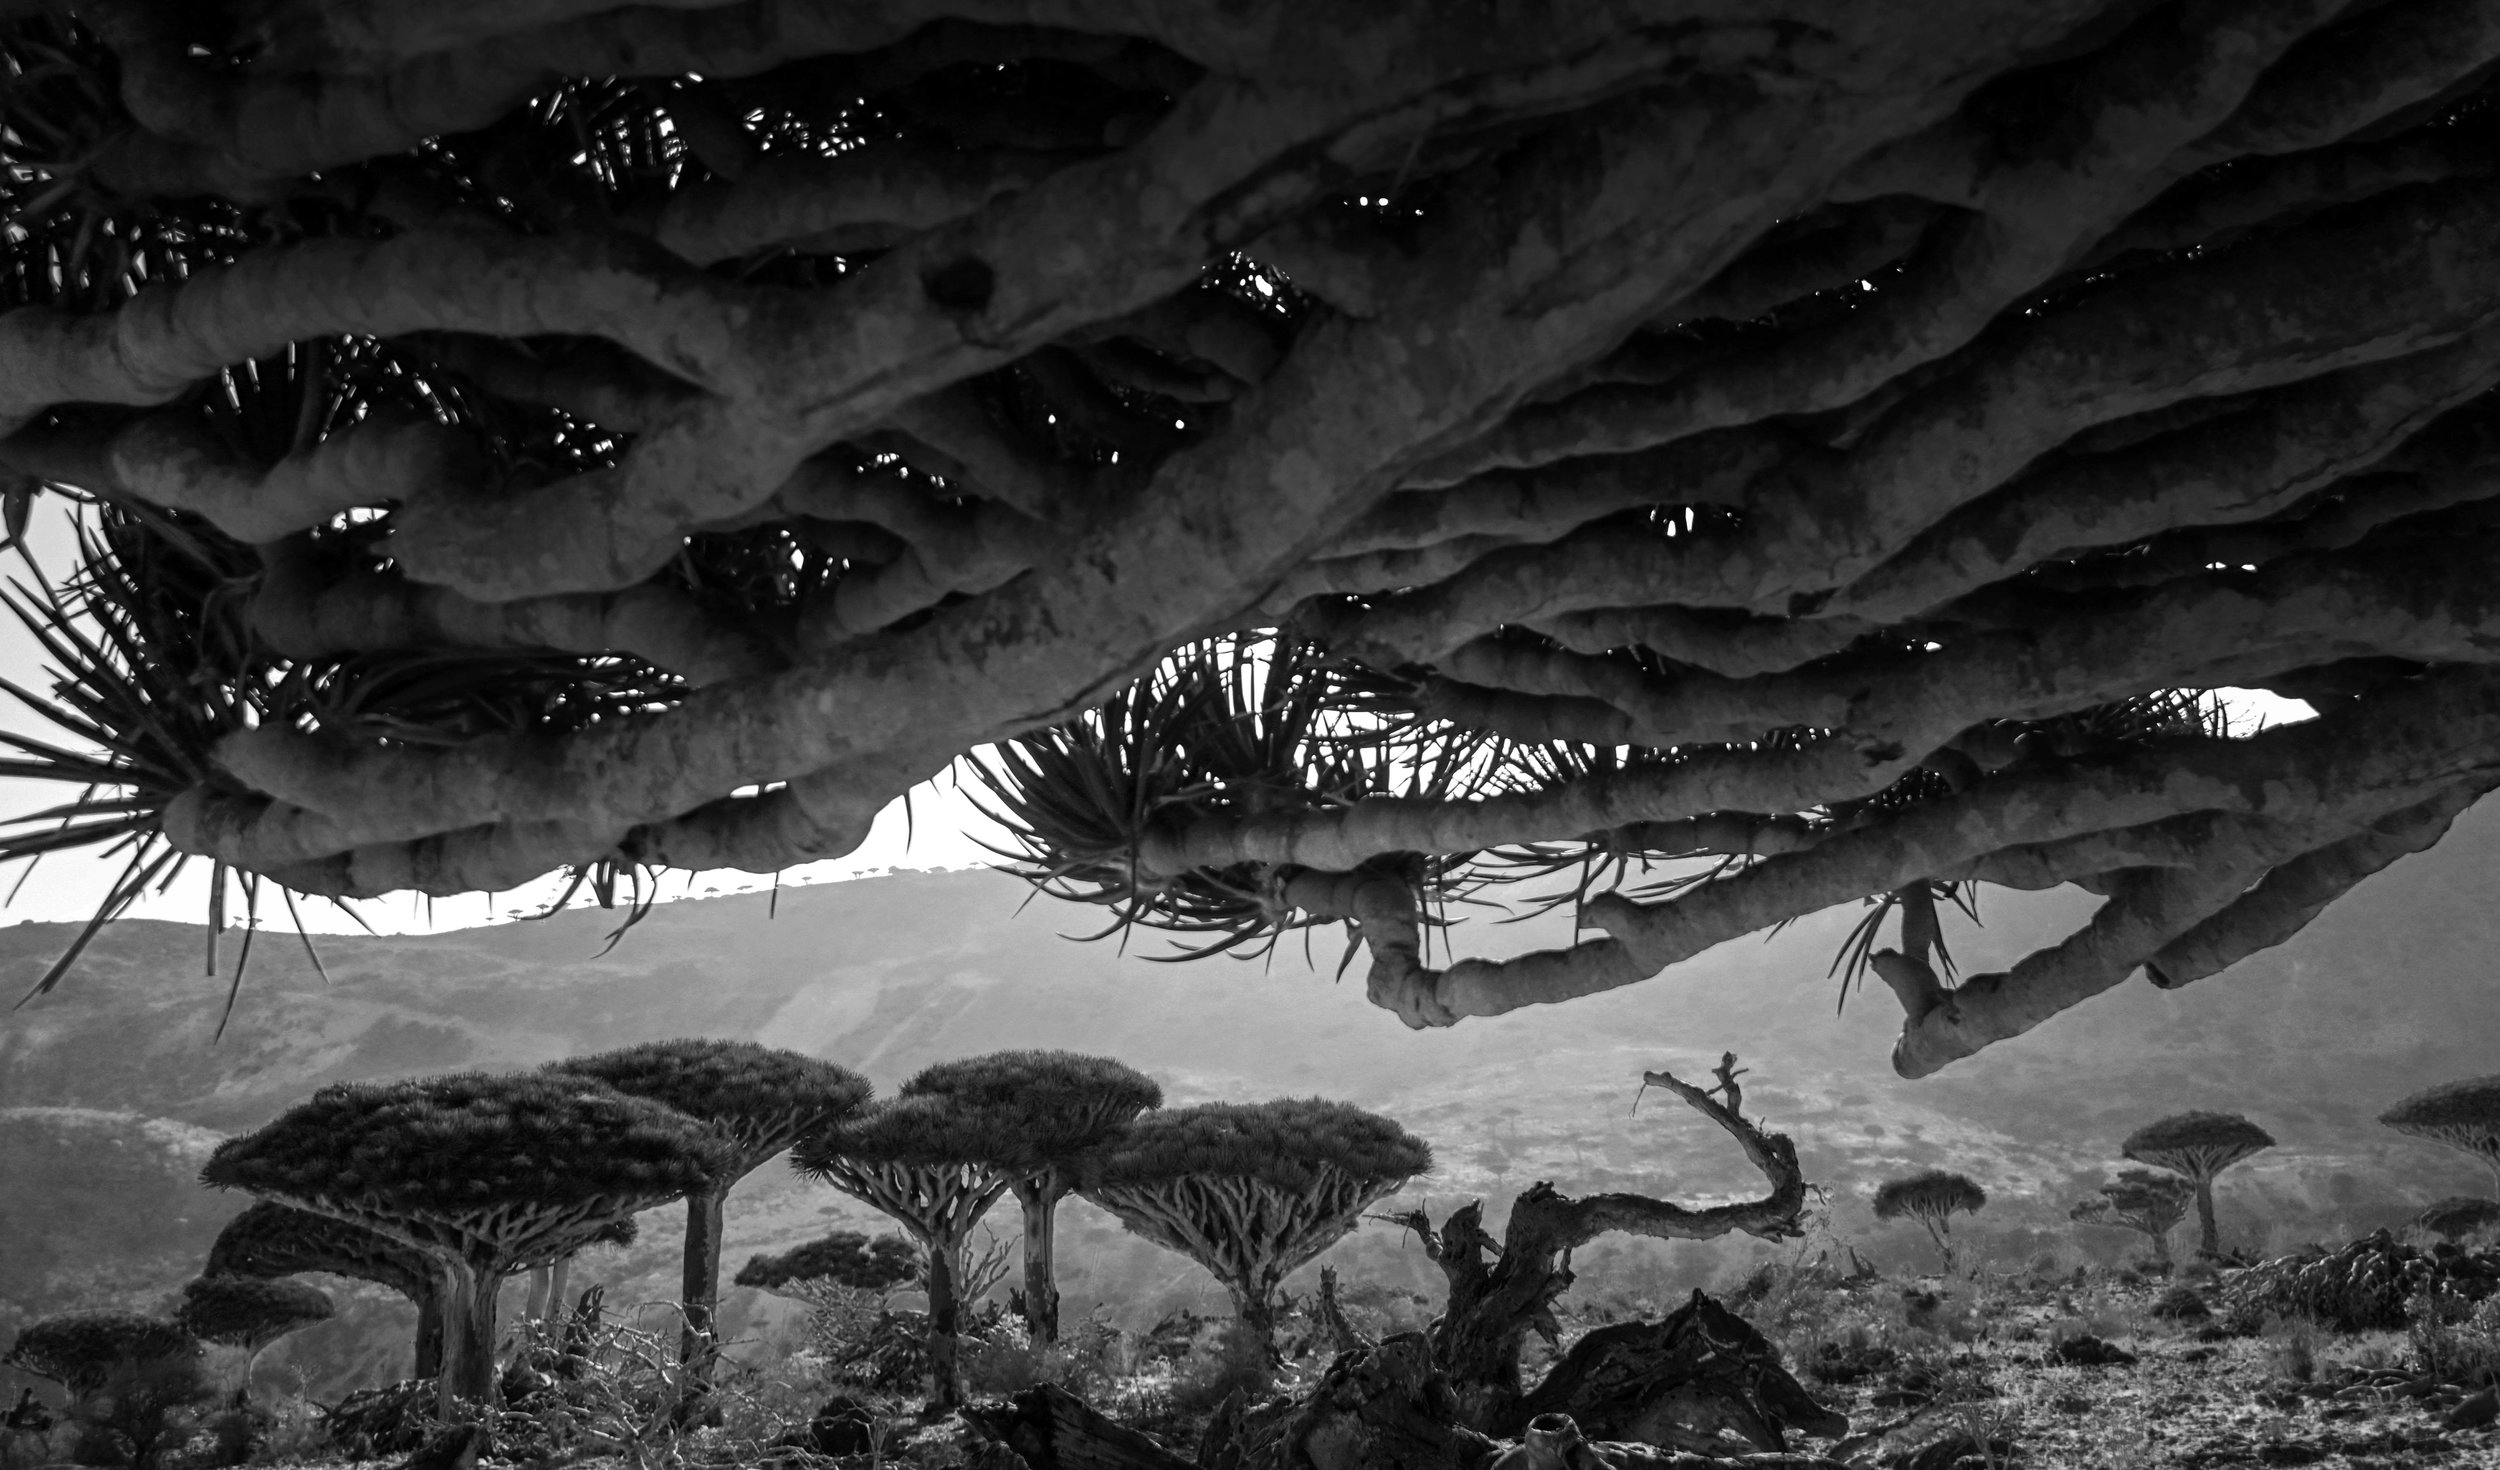  Project Socotra: The invisible Island February 2019
Dragon Blood Trees are one of the 700 endemic species found on the island. They are slowly dying and the reason is still unknown. Since the war started in 2015 all environmental programs on the is